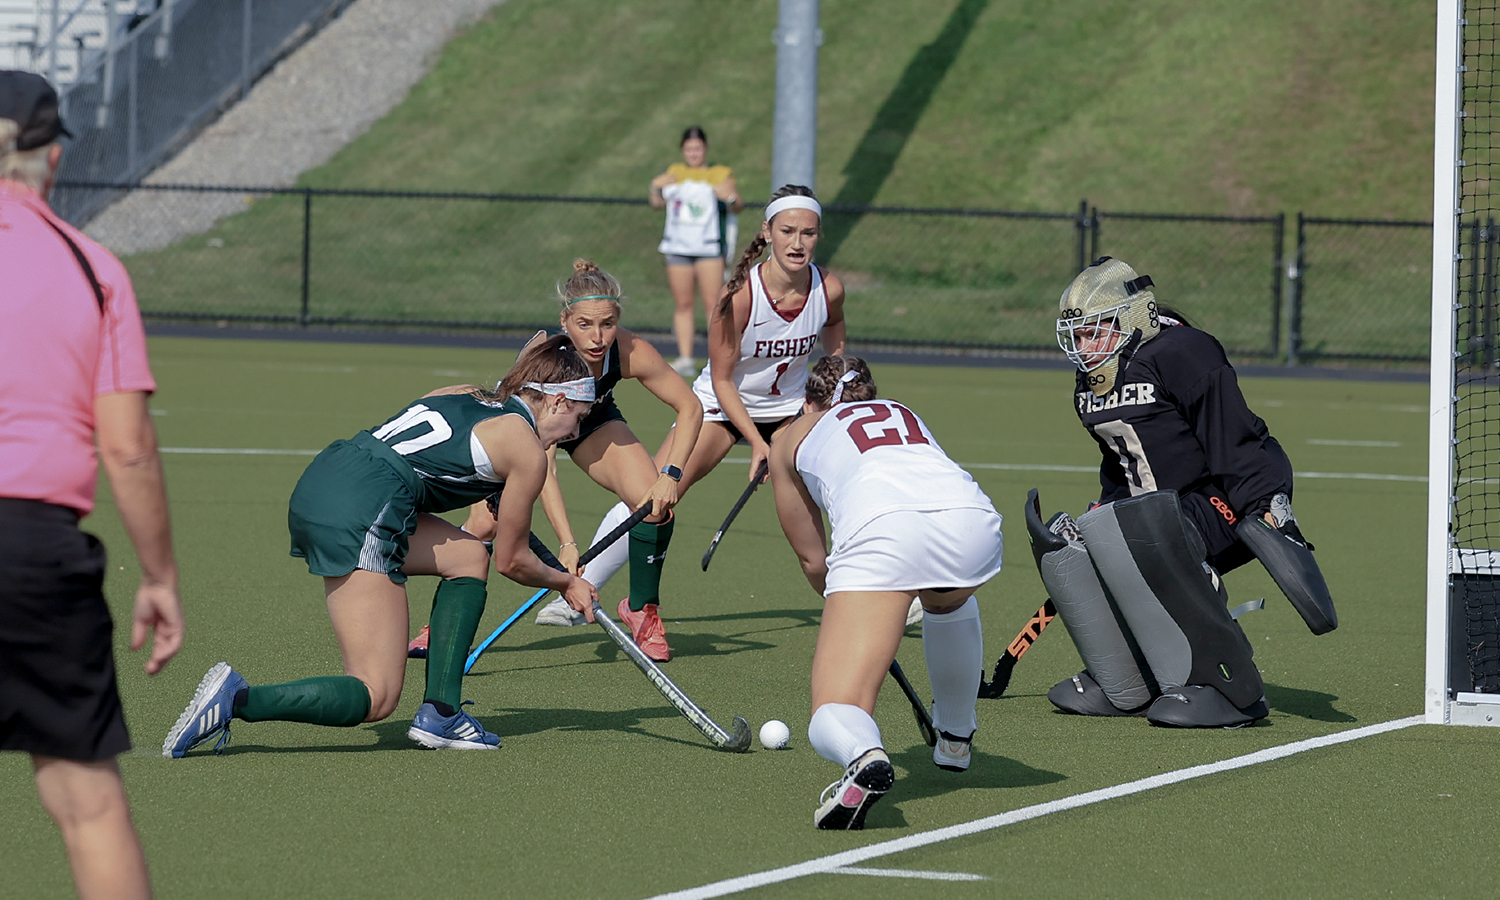 In the home opener, Rebecca Mantione ’25 takes a shot during the twentieth-ranked William Smith field hockey team’s victory over St. John Fisher.